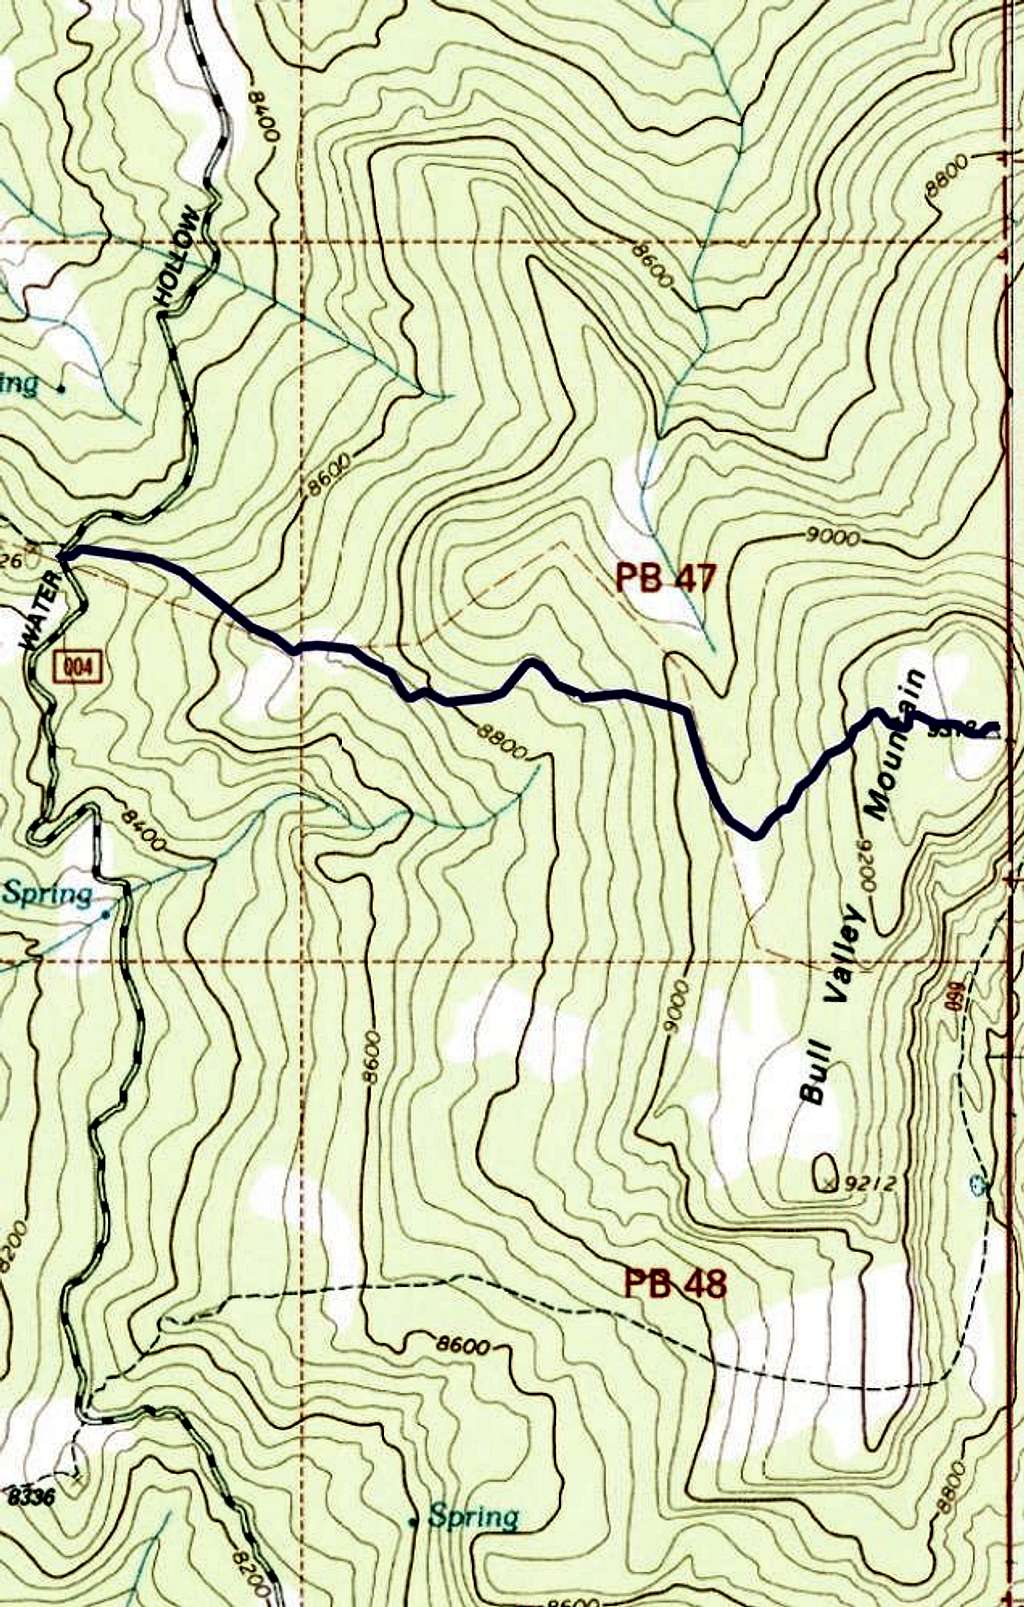 Gaia Track for Bull Valley Mtn